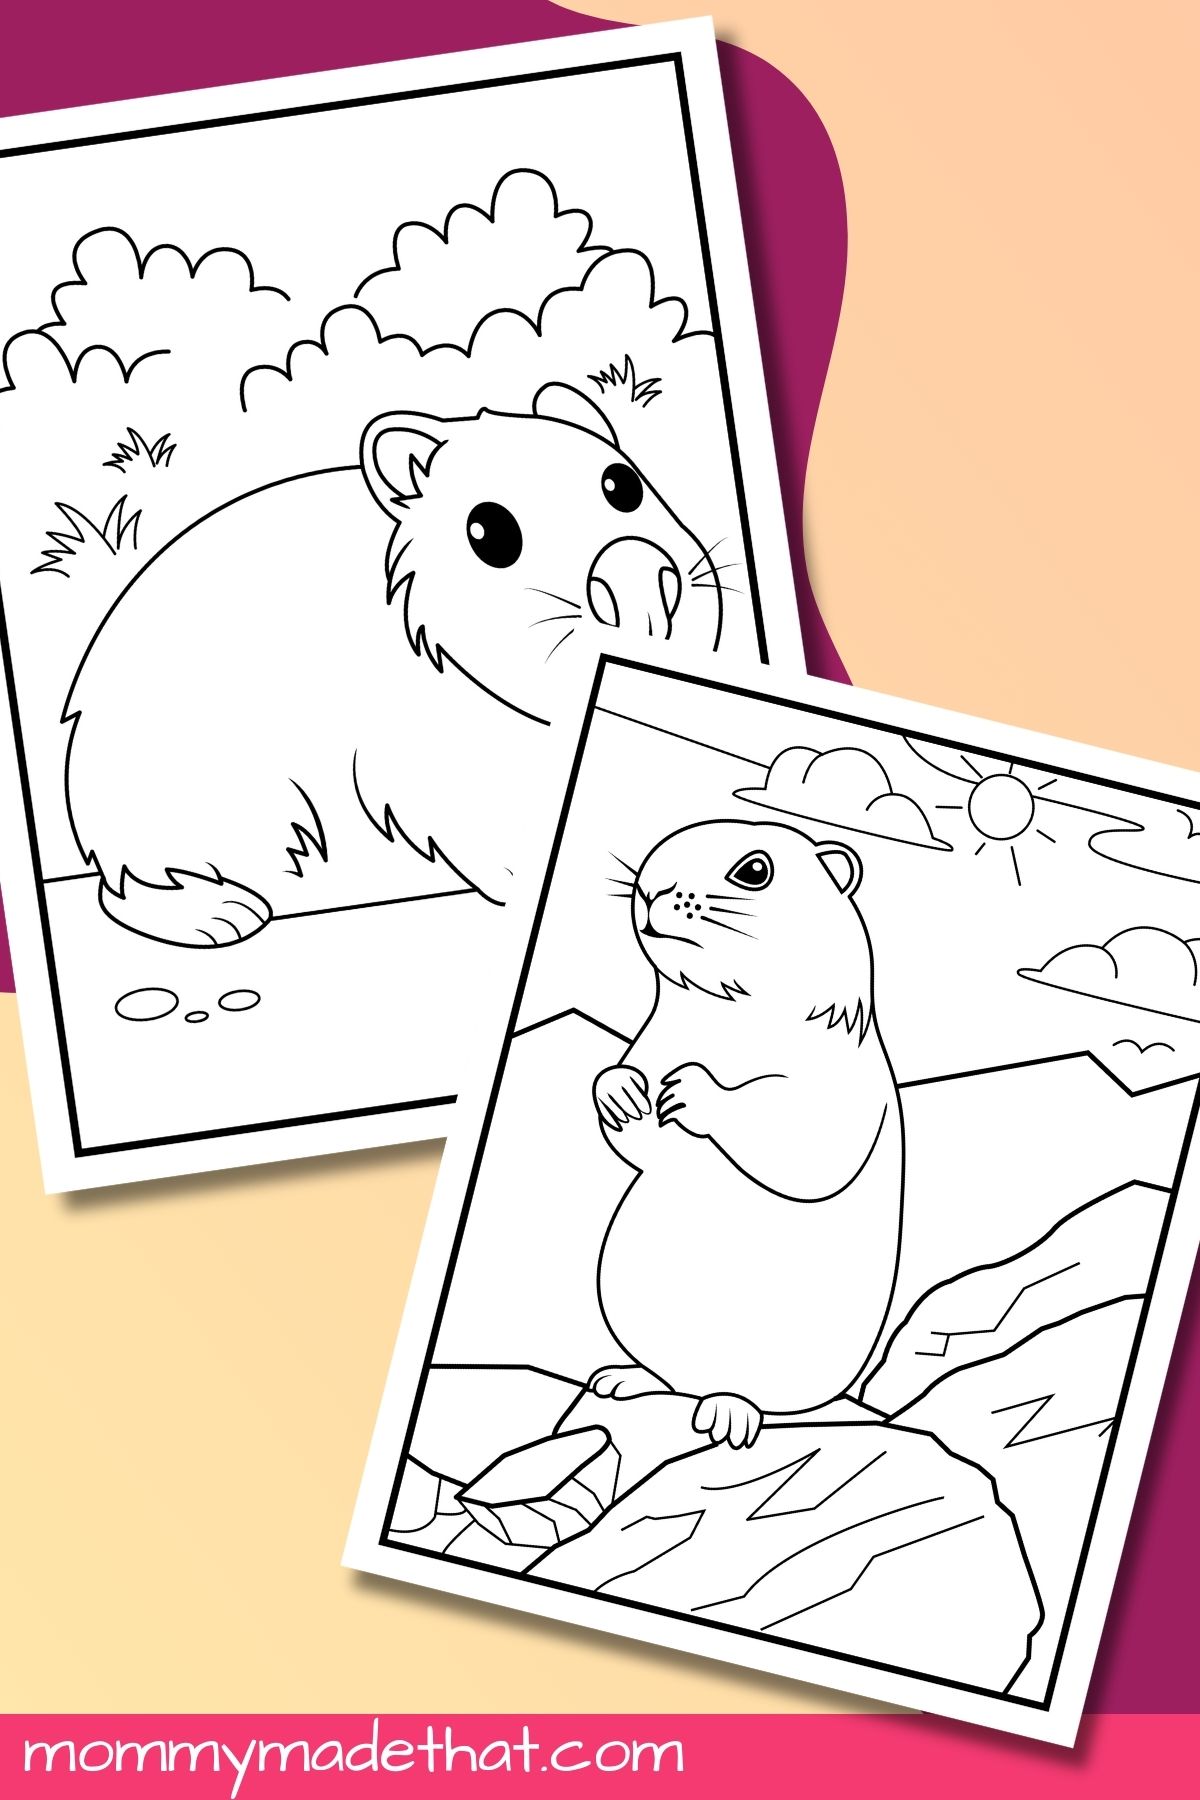 Printable Groundhog day coloring pages.